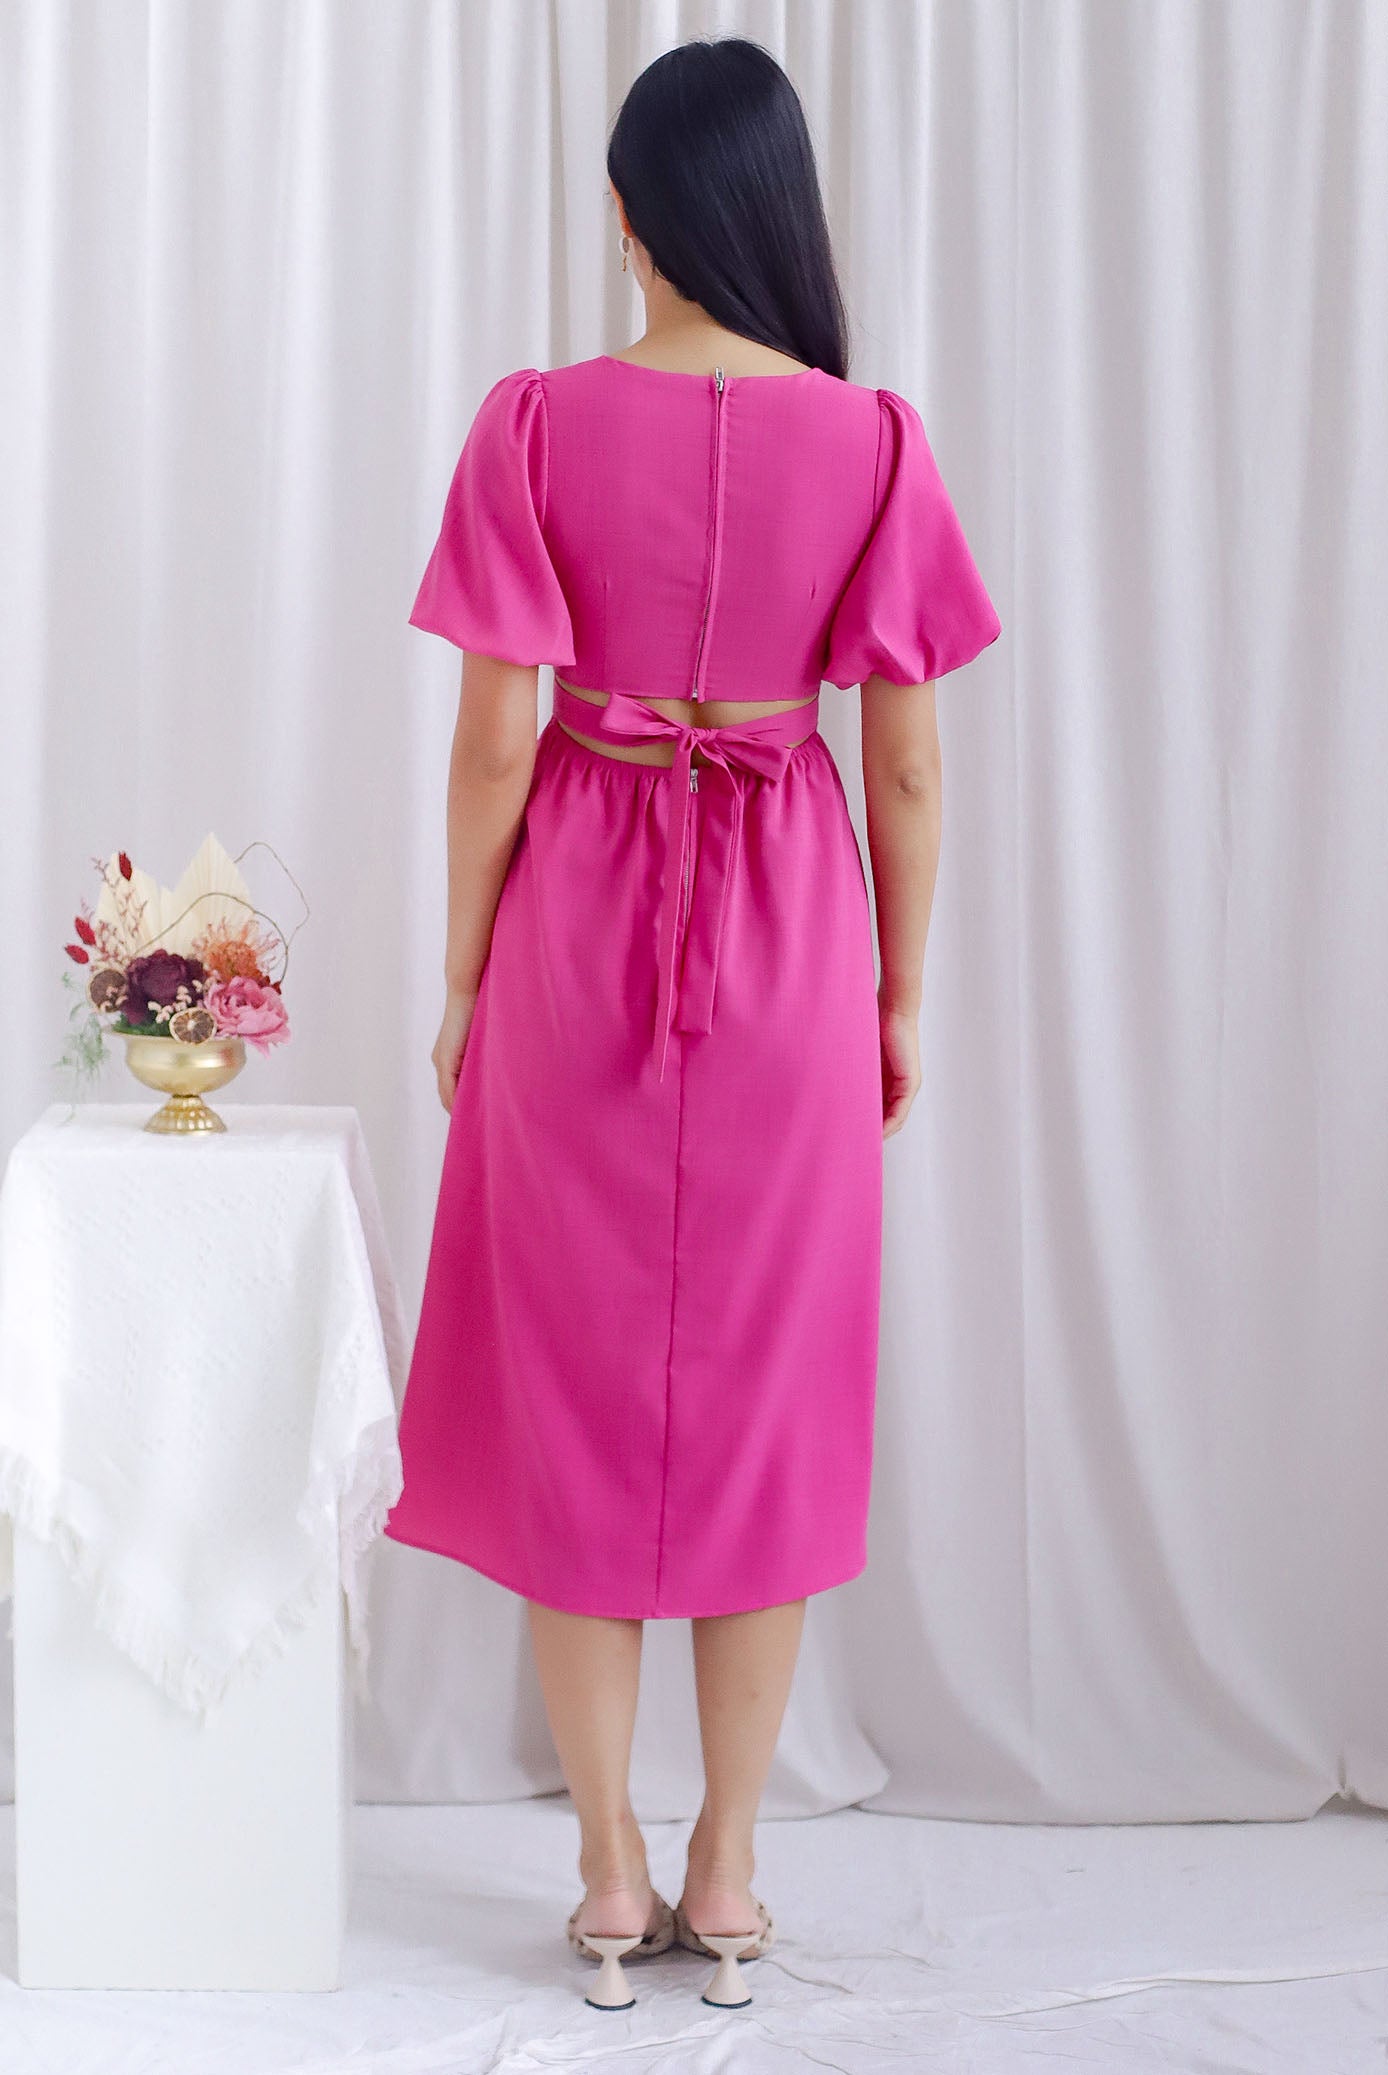 Danica Cut Out Tie Back Midi Sleeved Dress In Hot Pink